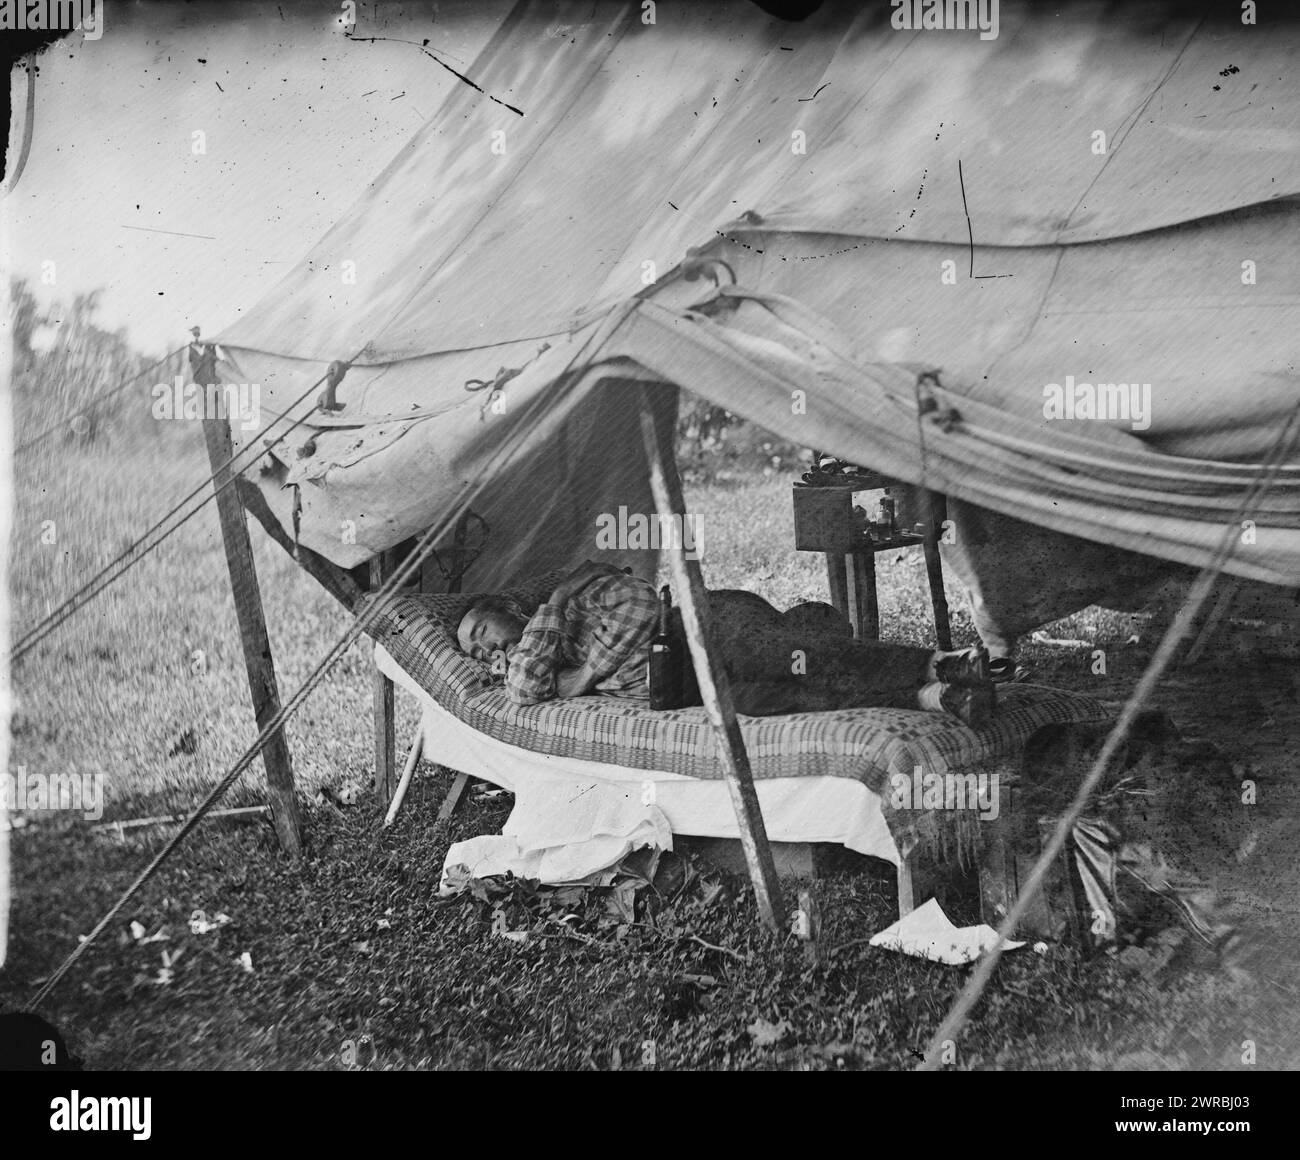 Westover Landing, Va. Lt. Col. Samuel W. Owen, 3d Pennsylvania Cavalry, caught napping, Photograph from the main eastern theater of war, the Peninsular Campaign, May-August 1862., Gardner, Alexander, 1821-1882, photographer, 1862 August., United States., Army., Pennsylvania Cavalry Regiment, 3rd (1861-1865), Glass negatives, 1860-1870, Stereographs, 1860-1870, 1 negative: glass, stereograph, wet collodion, 4 x 10 in Stock Photo